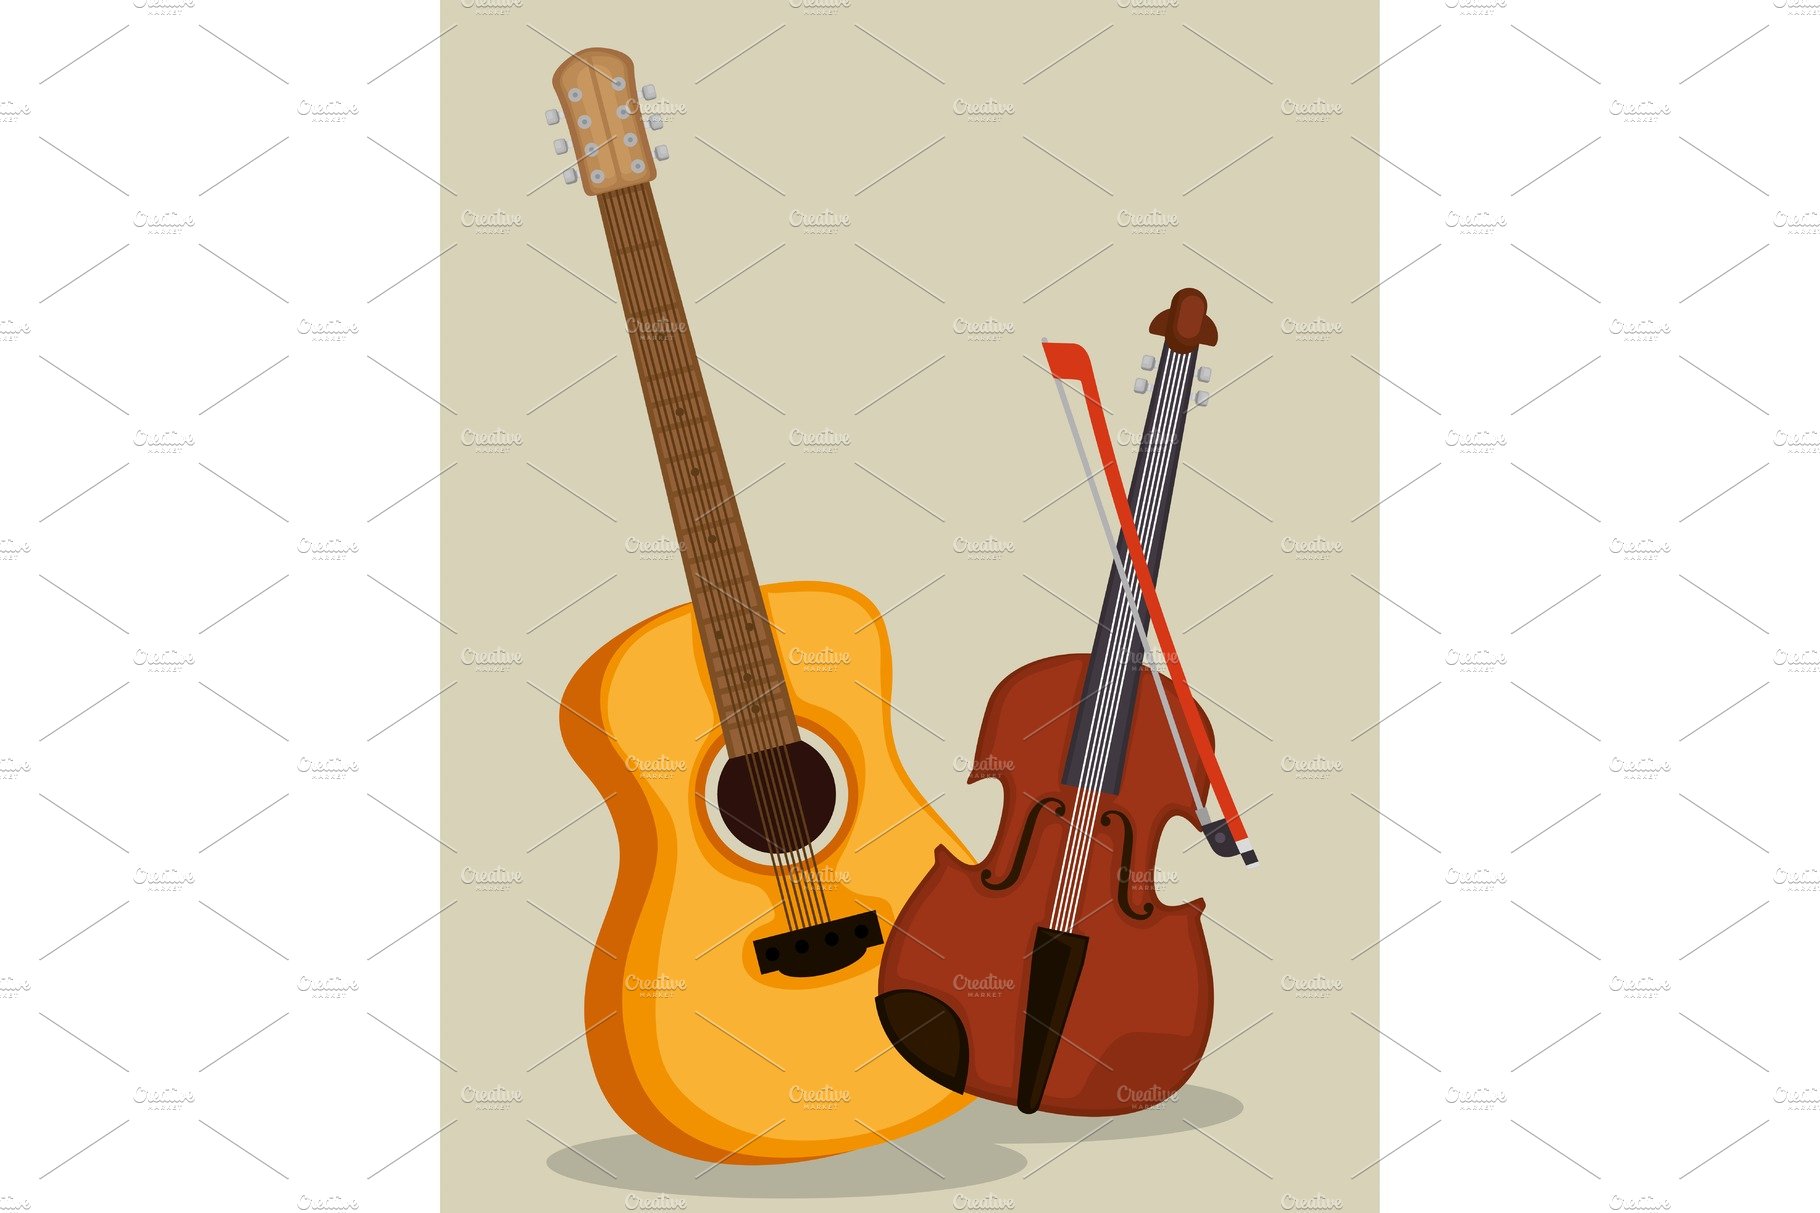 guitar and violin instruments cover image.